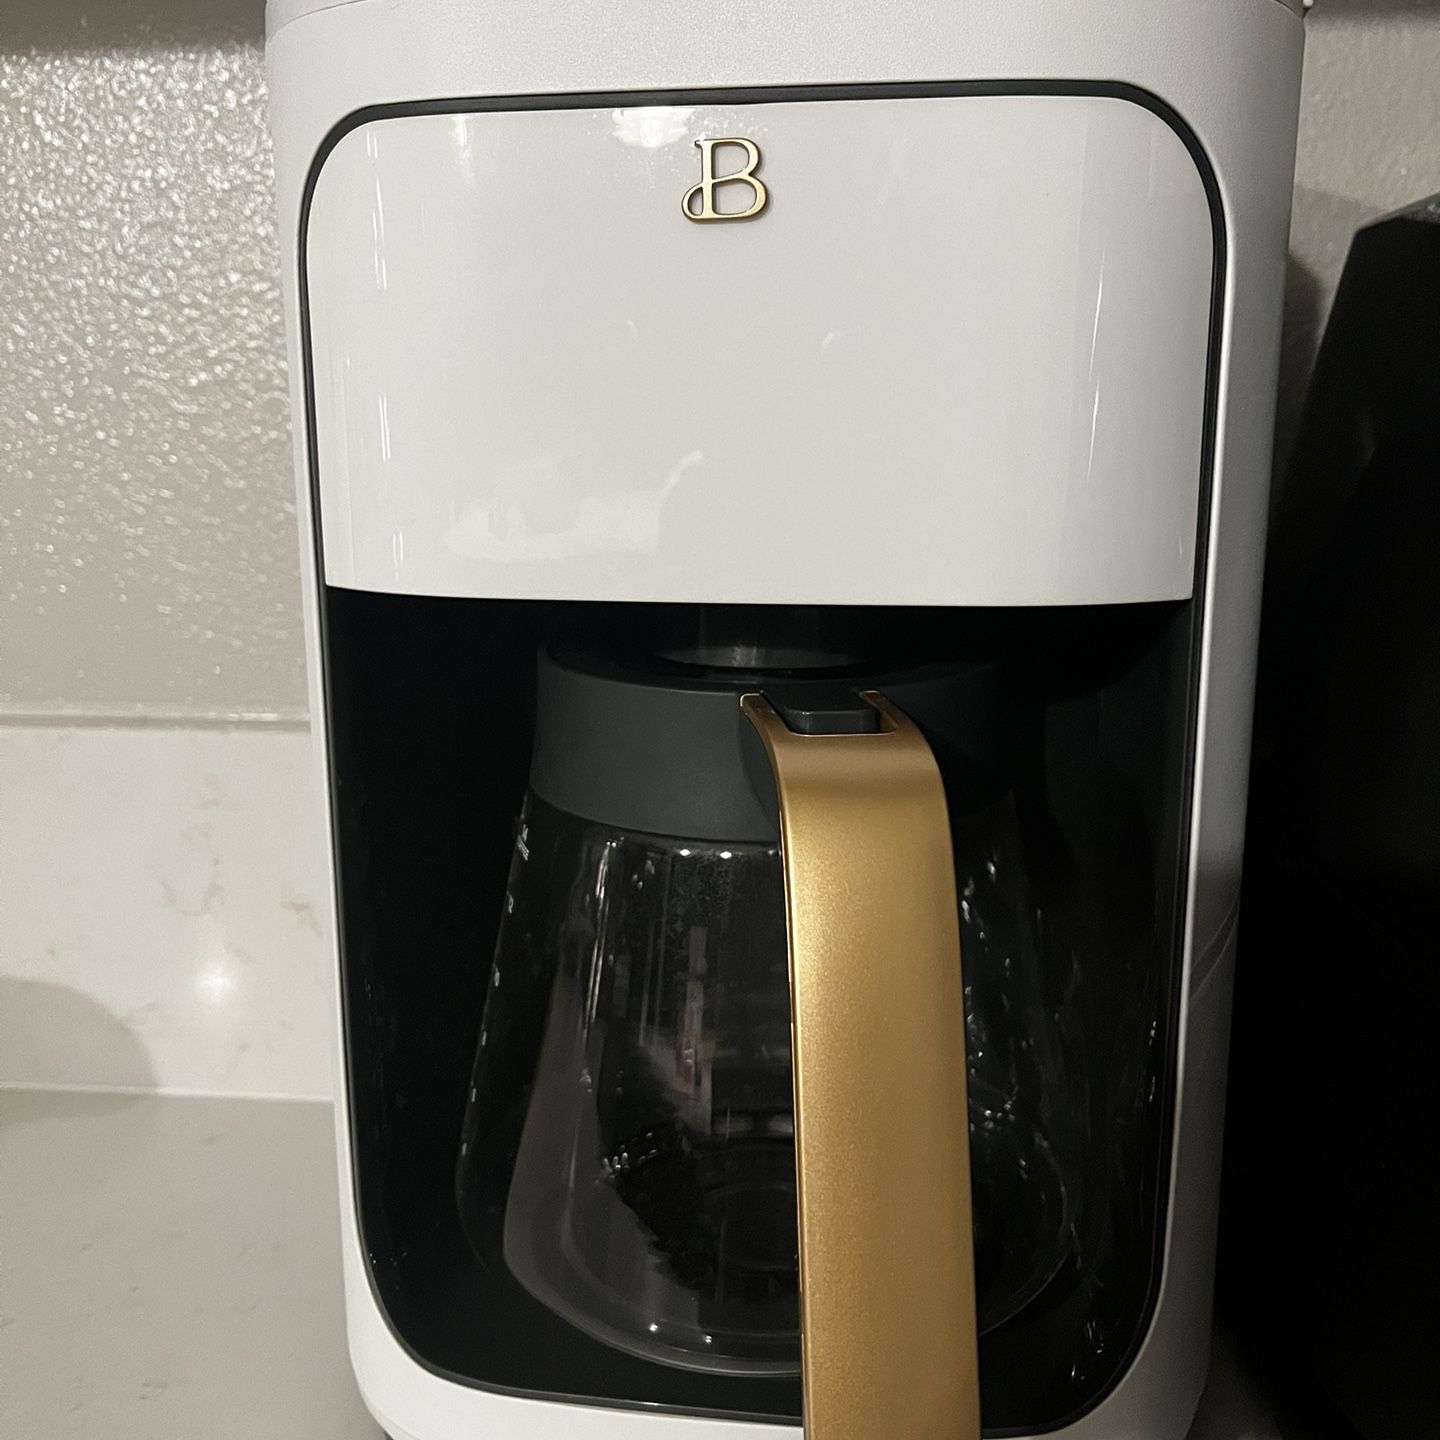 Ninja Coffee Maker With Frother And Can Make Single Cup With Pods As Well!  for Sale in Victorville, CA - OfferUp